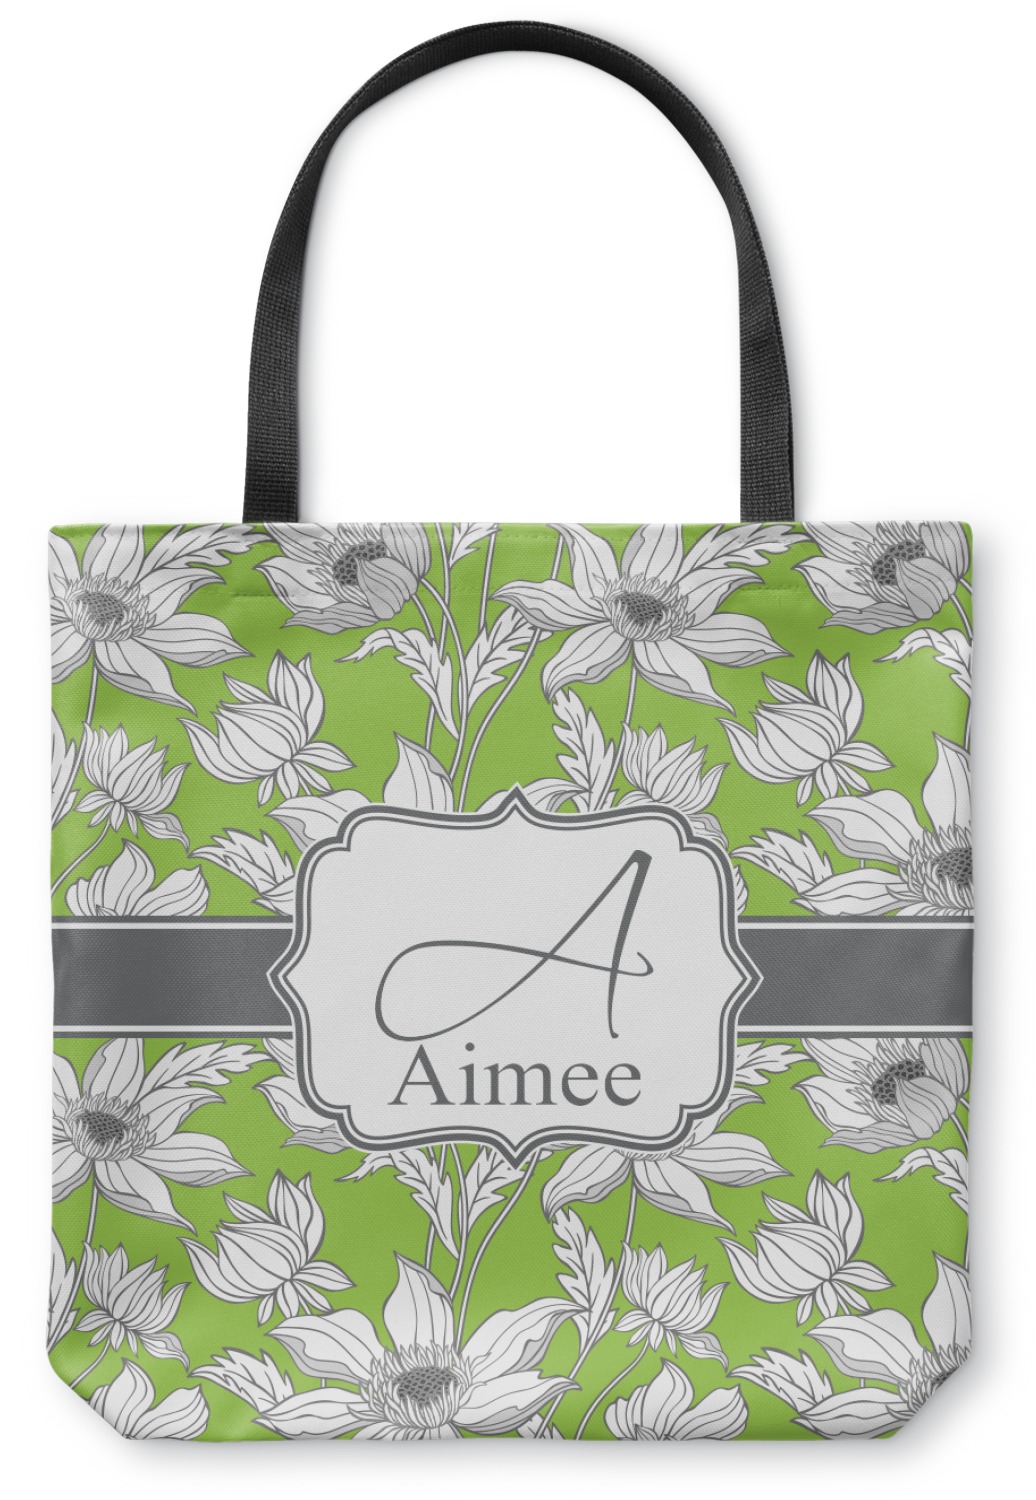 Wild Daisies Canvas Tote Bag (Personalized) - YouCustomizeIt